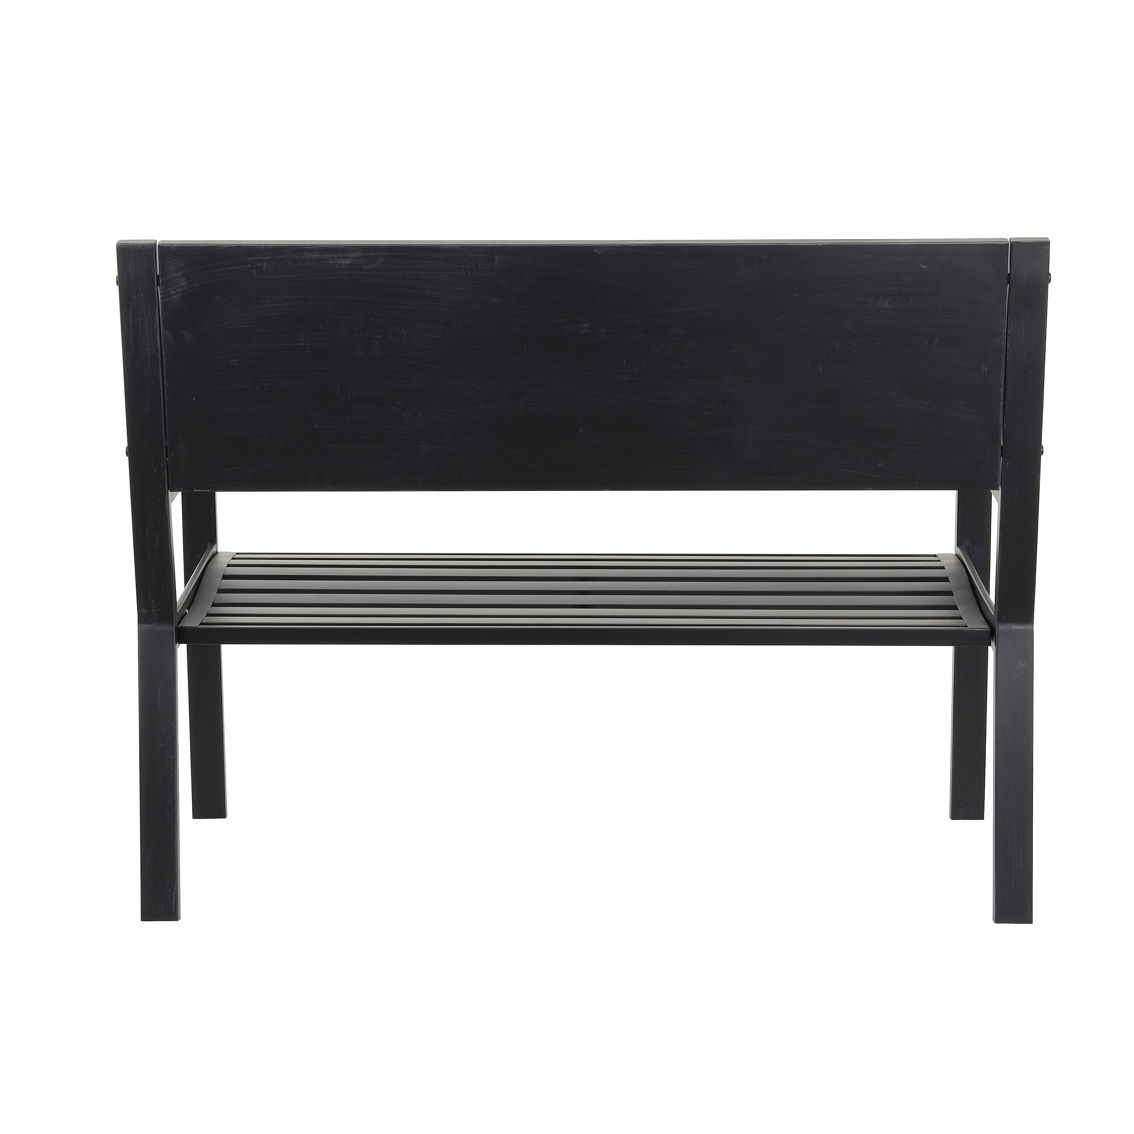 Morgan Hill Home Traditional Black Metal Outdoor Bench - Image 3 of 5